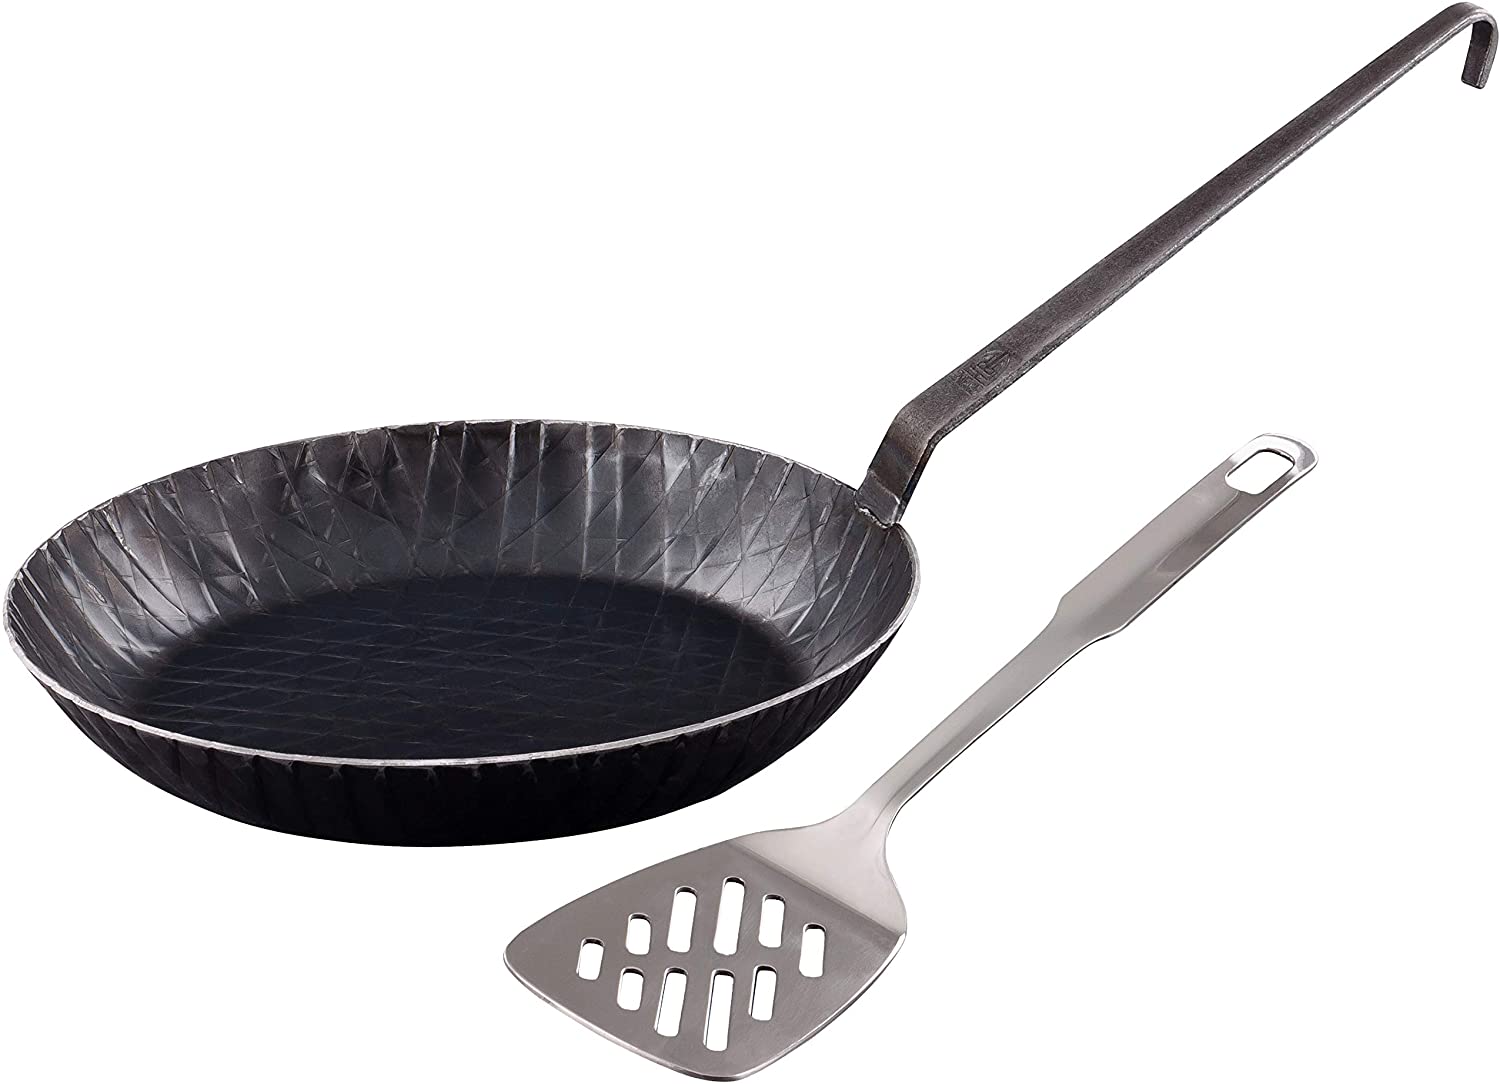 GRAWE Gräwe, Wrought Iron Frying Pan with Hook Handle, 28 cm in Diameter, Extra High Rim, Uncoated Professional Pan, Ø 28 cm